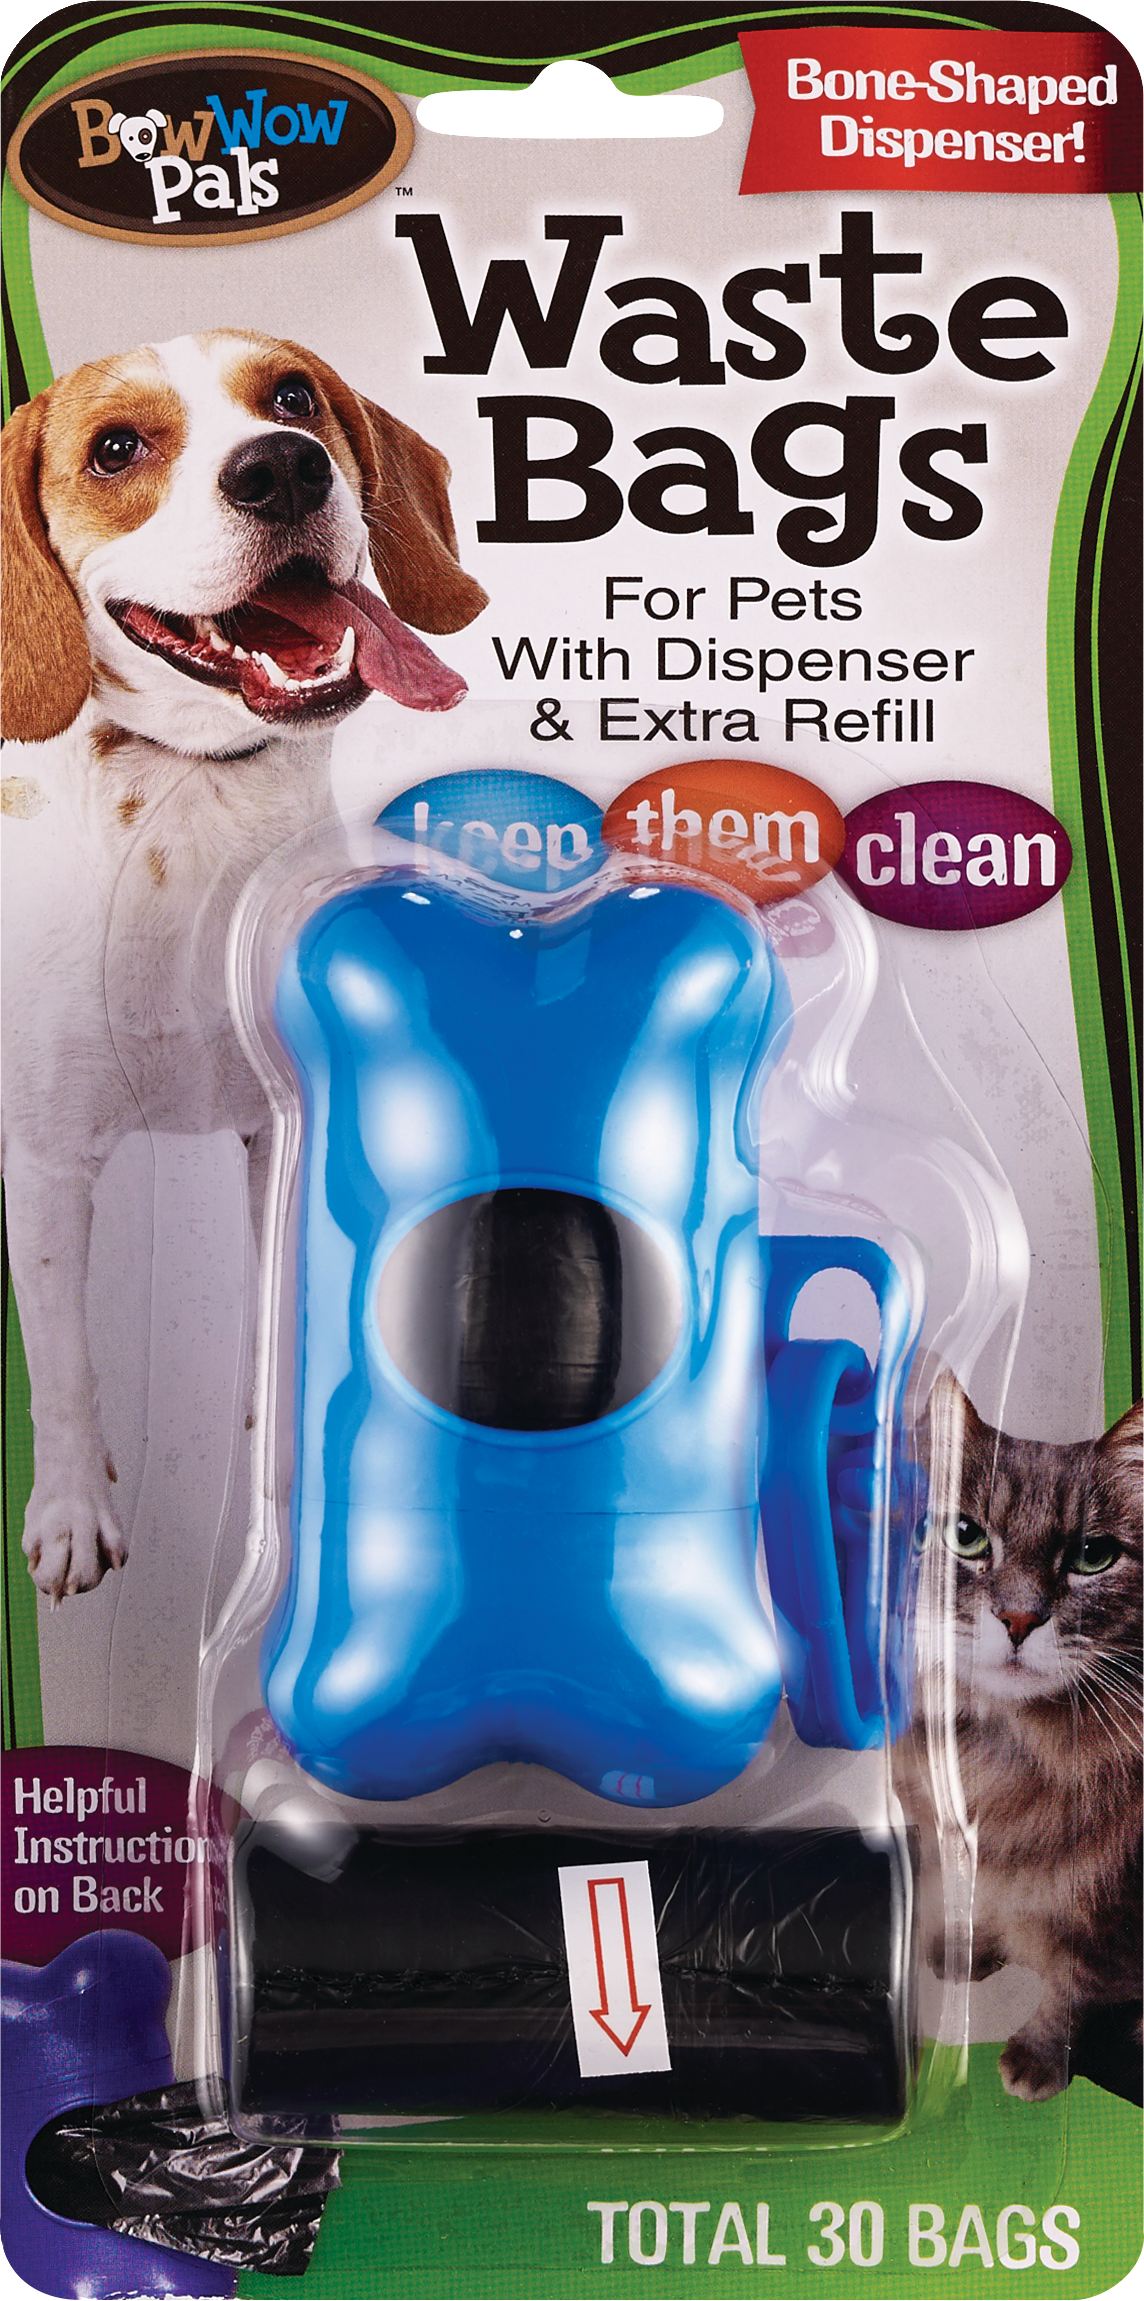 Bow Wow Pals Waste Bags With Dispenser & Extra Refill